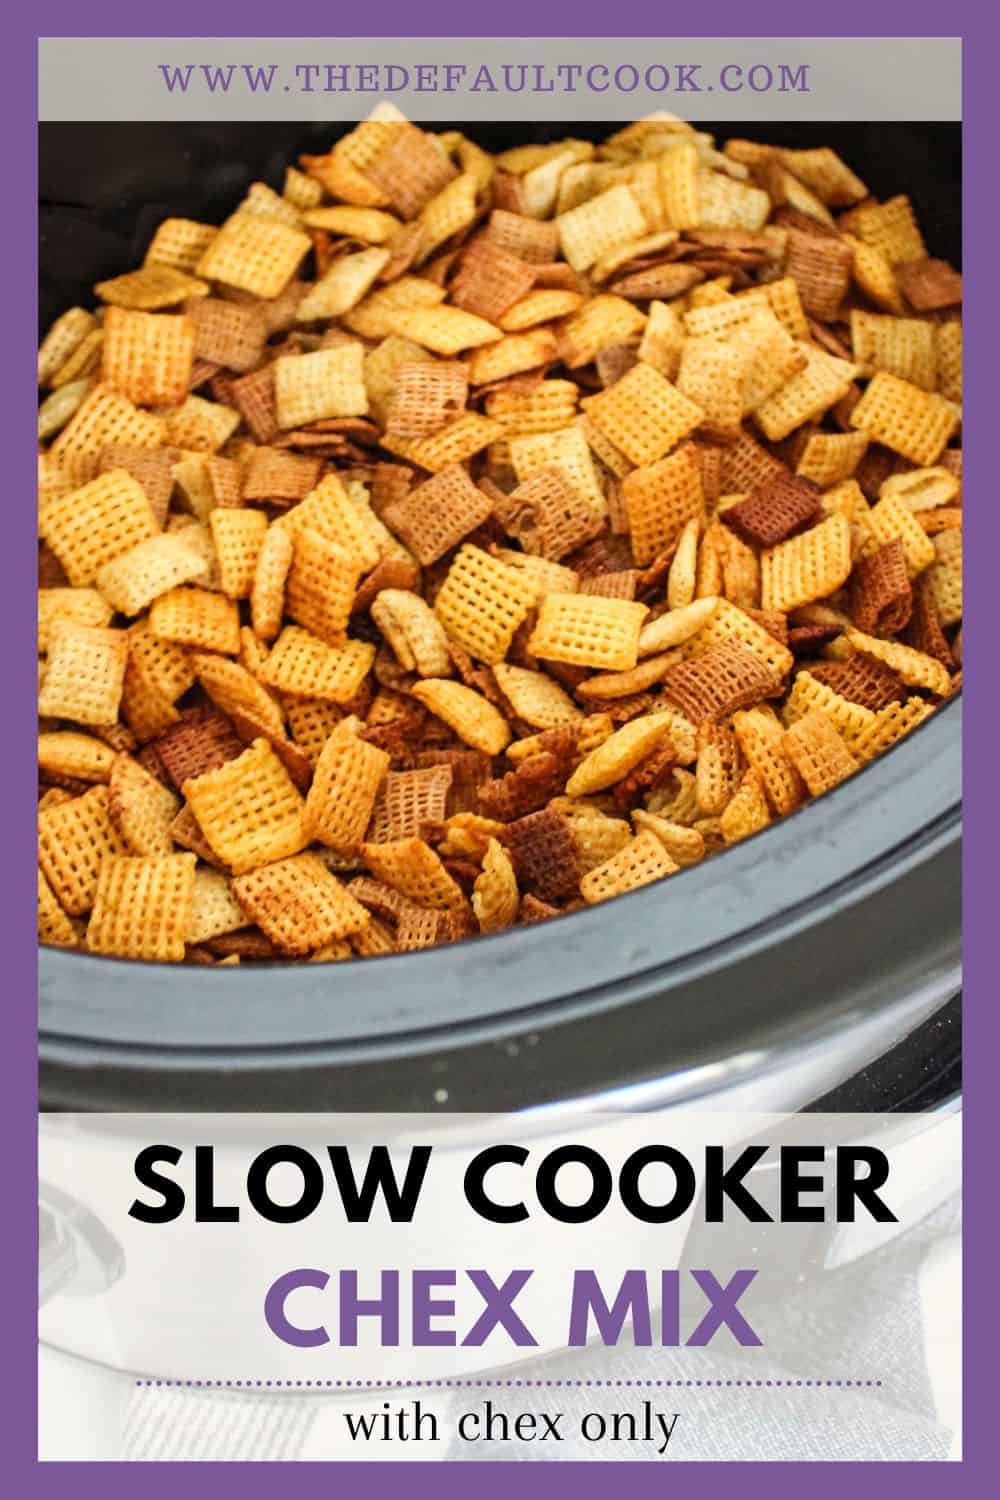 Spiced chex mix in a slow cooker with title at bottom.